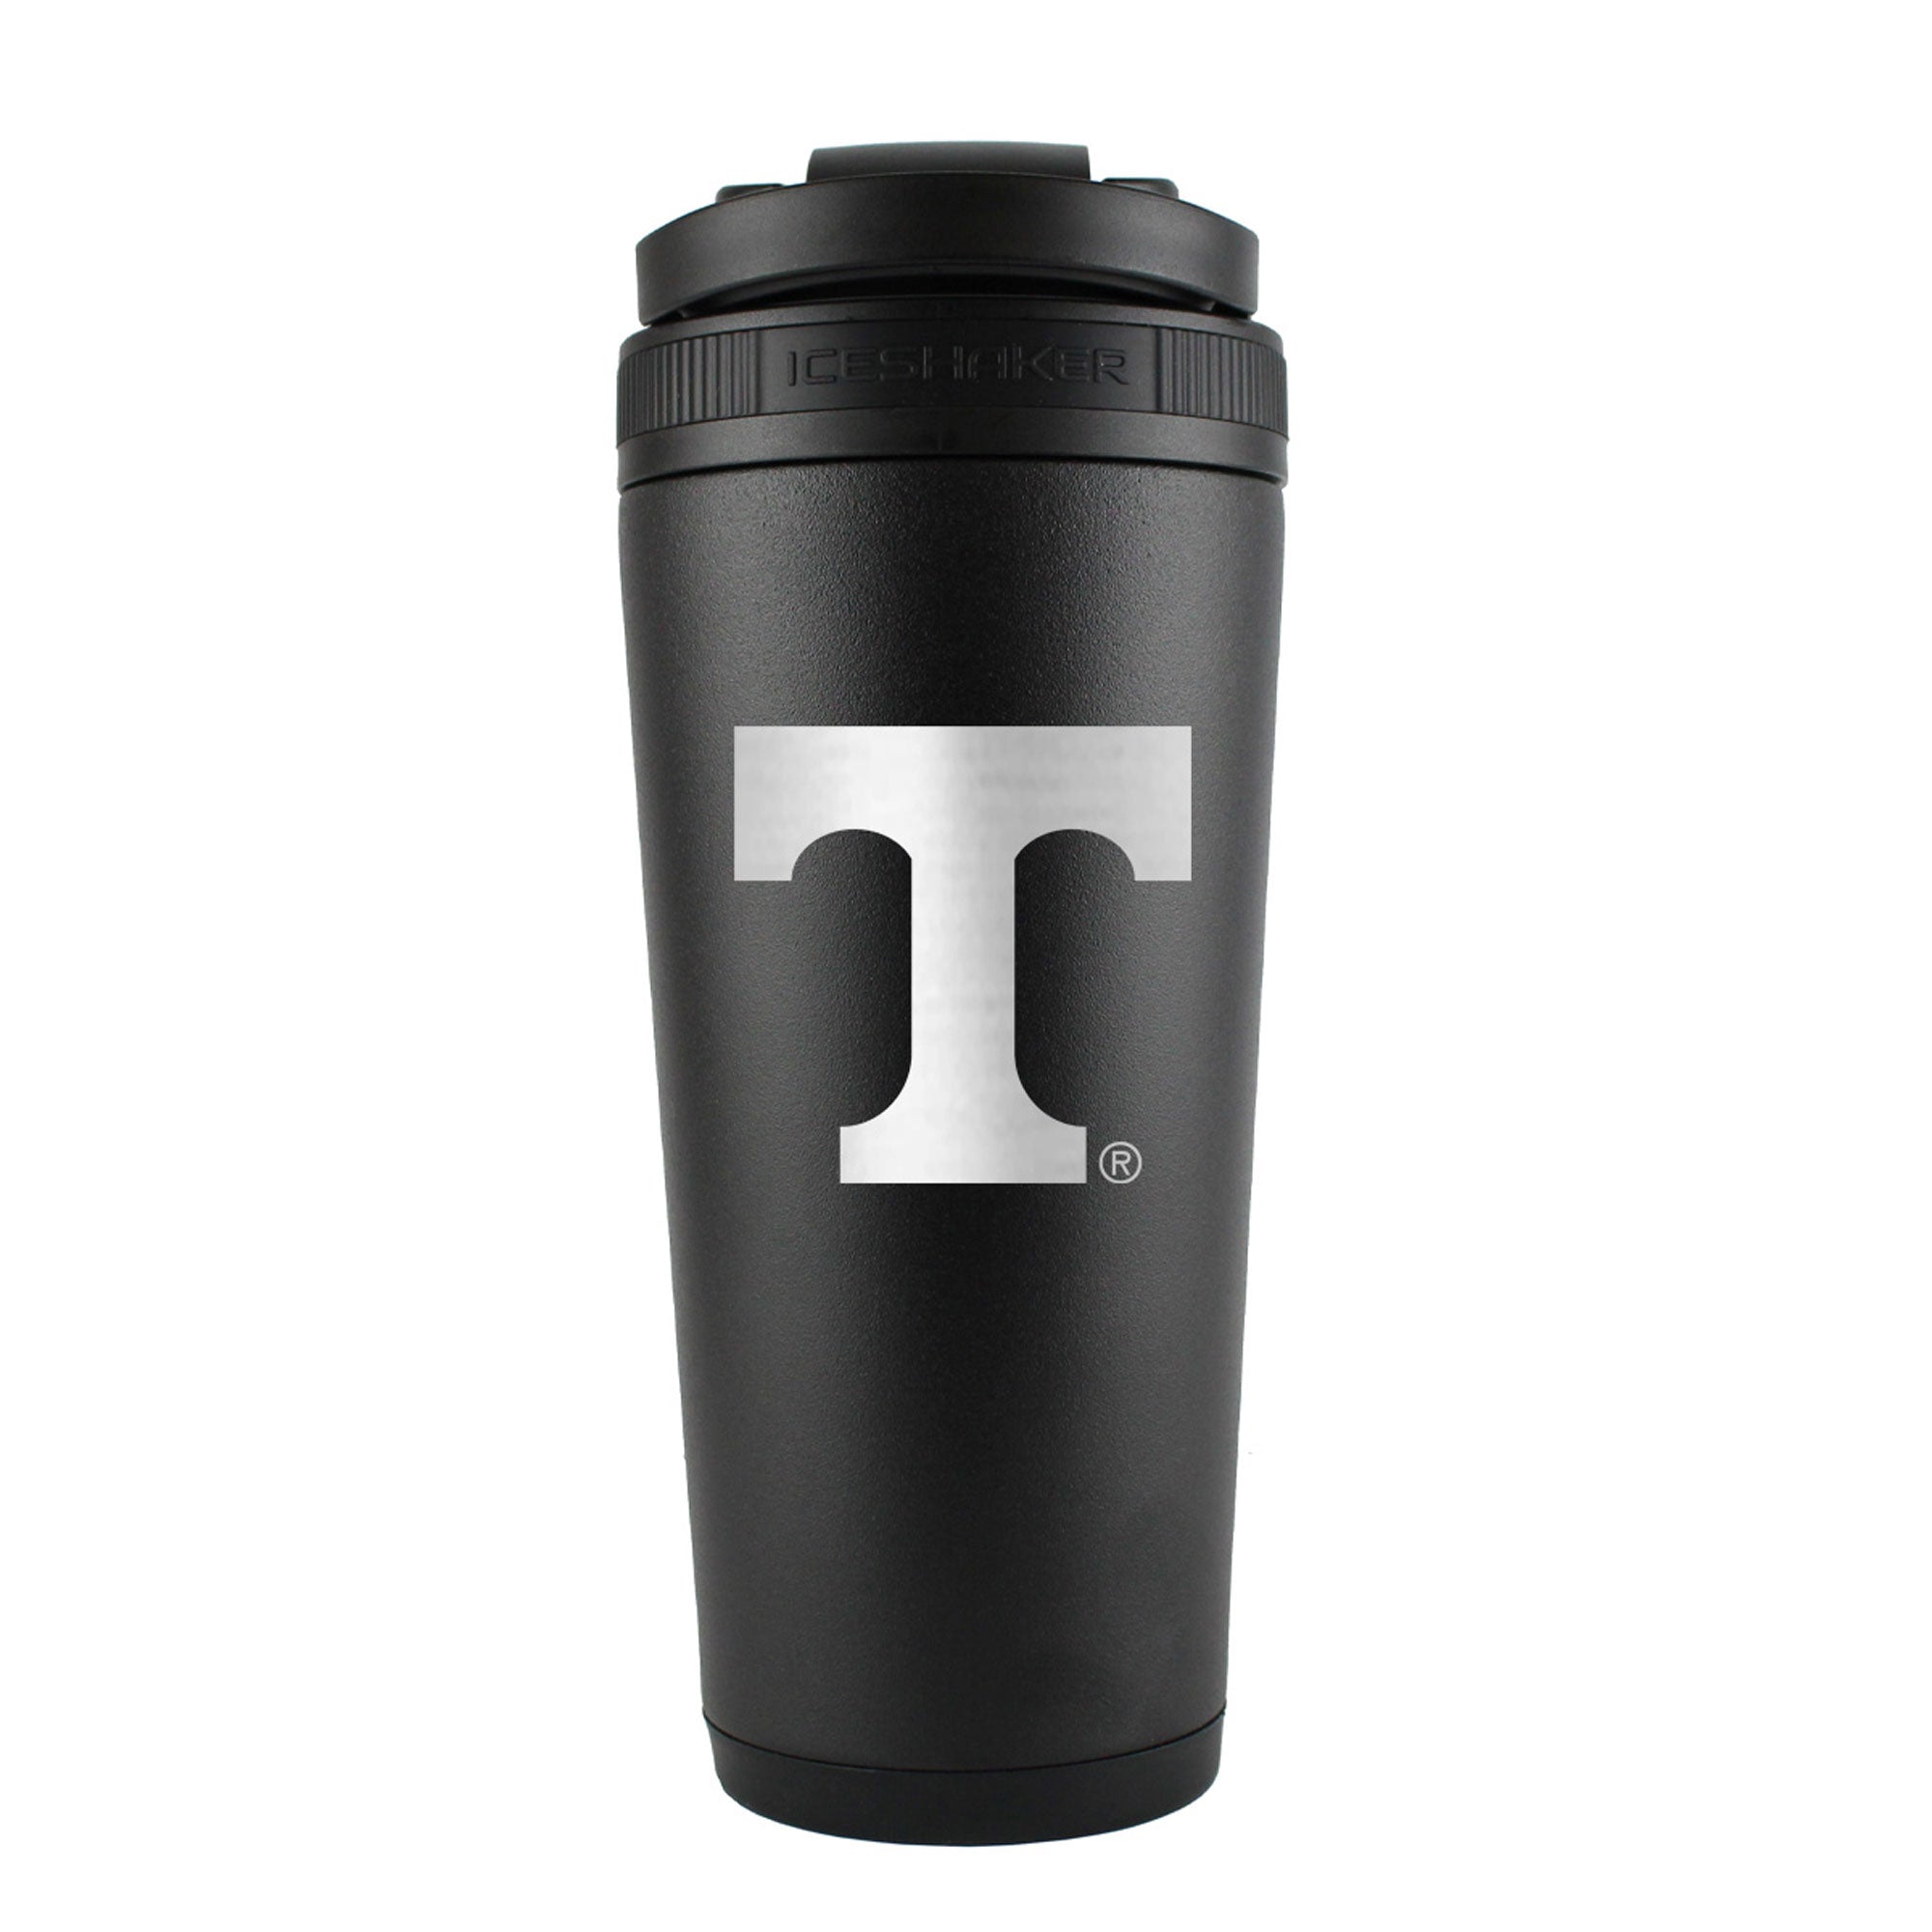 Officially Licensed University of Tennessee 26oz Ice Shaker - Black